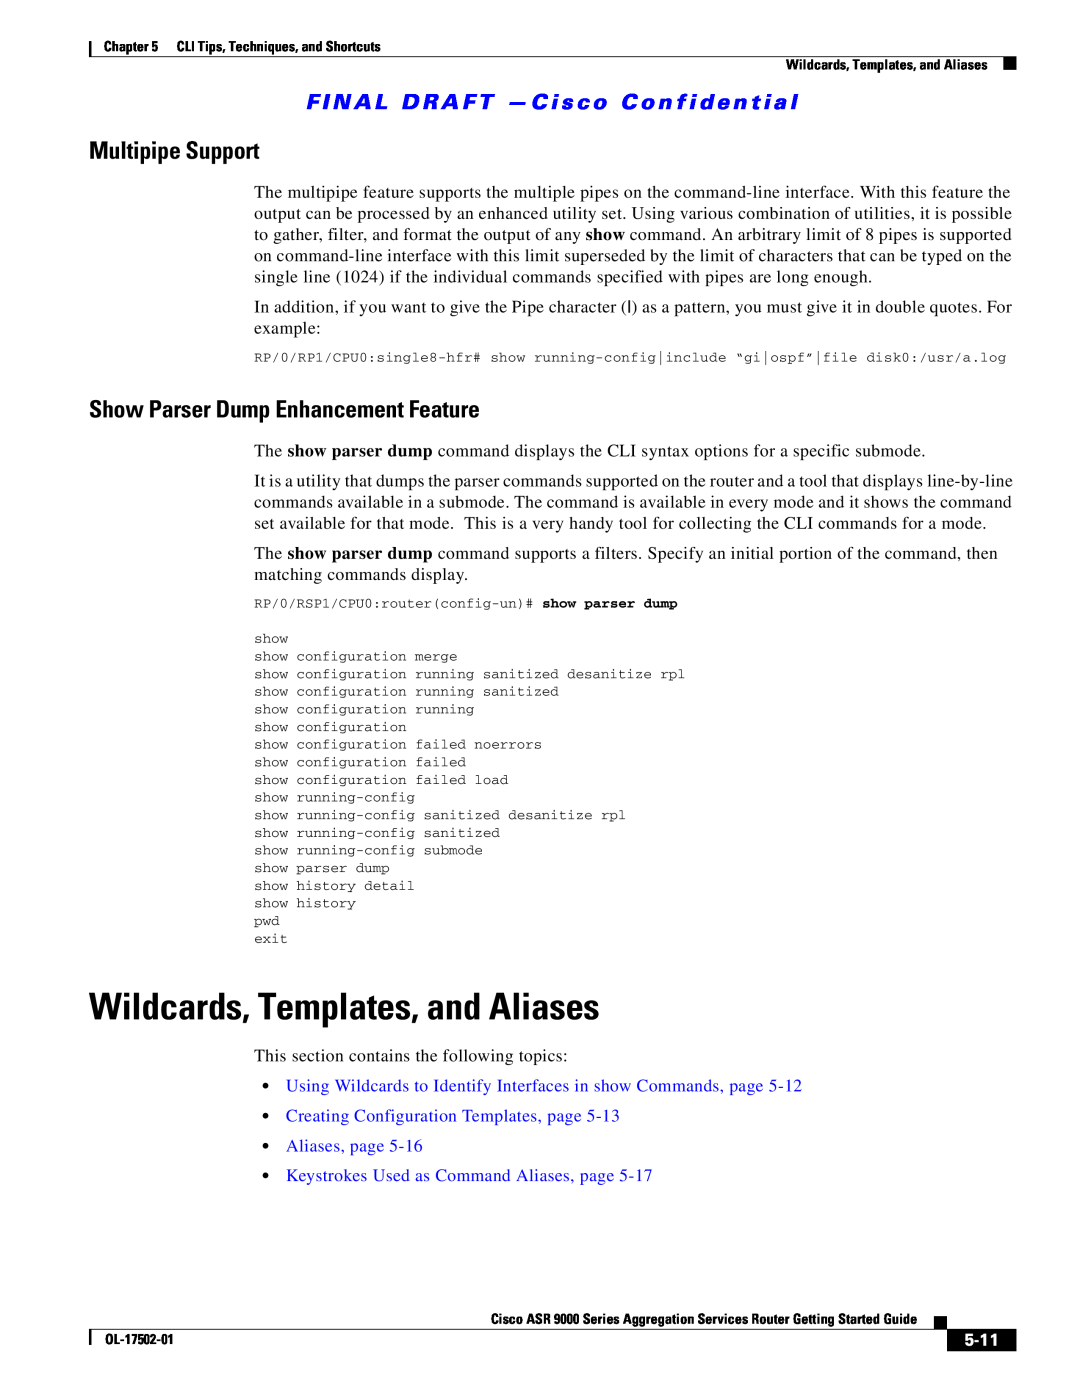 Cisco Systems A9KMOD80TR Wildcards, Templates, and Aliases, Multipipe Support, Show Parser Dump Enhancement Feature, 5-11 